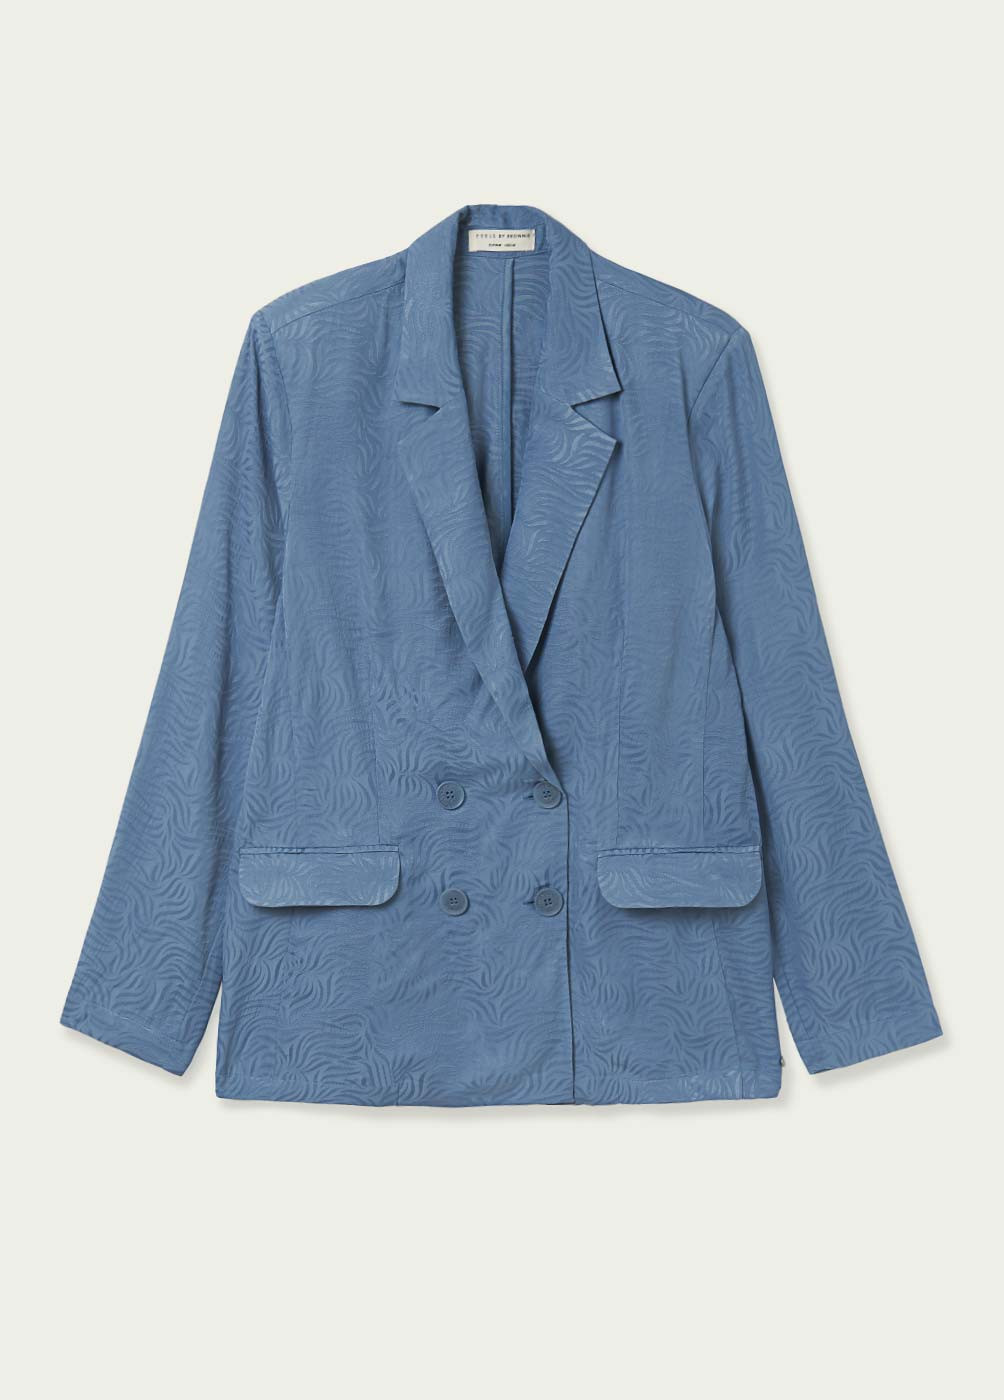 BLUR JACQUARD DOUBLE-BREASTED BLAZER